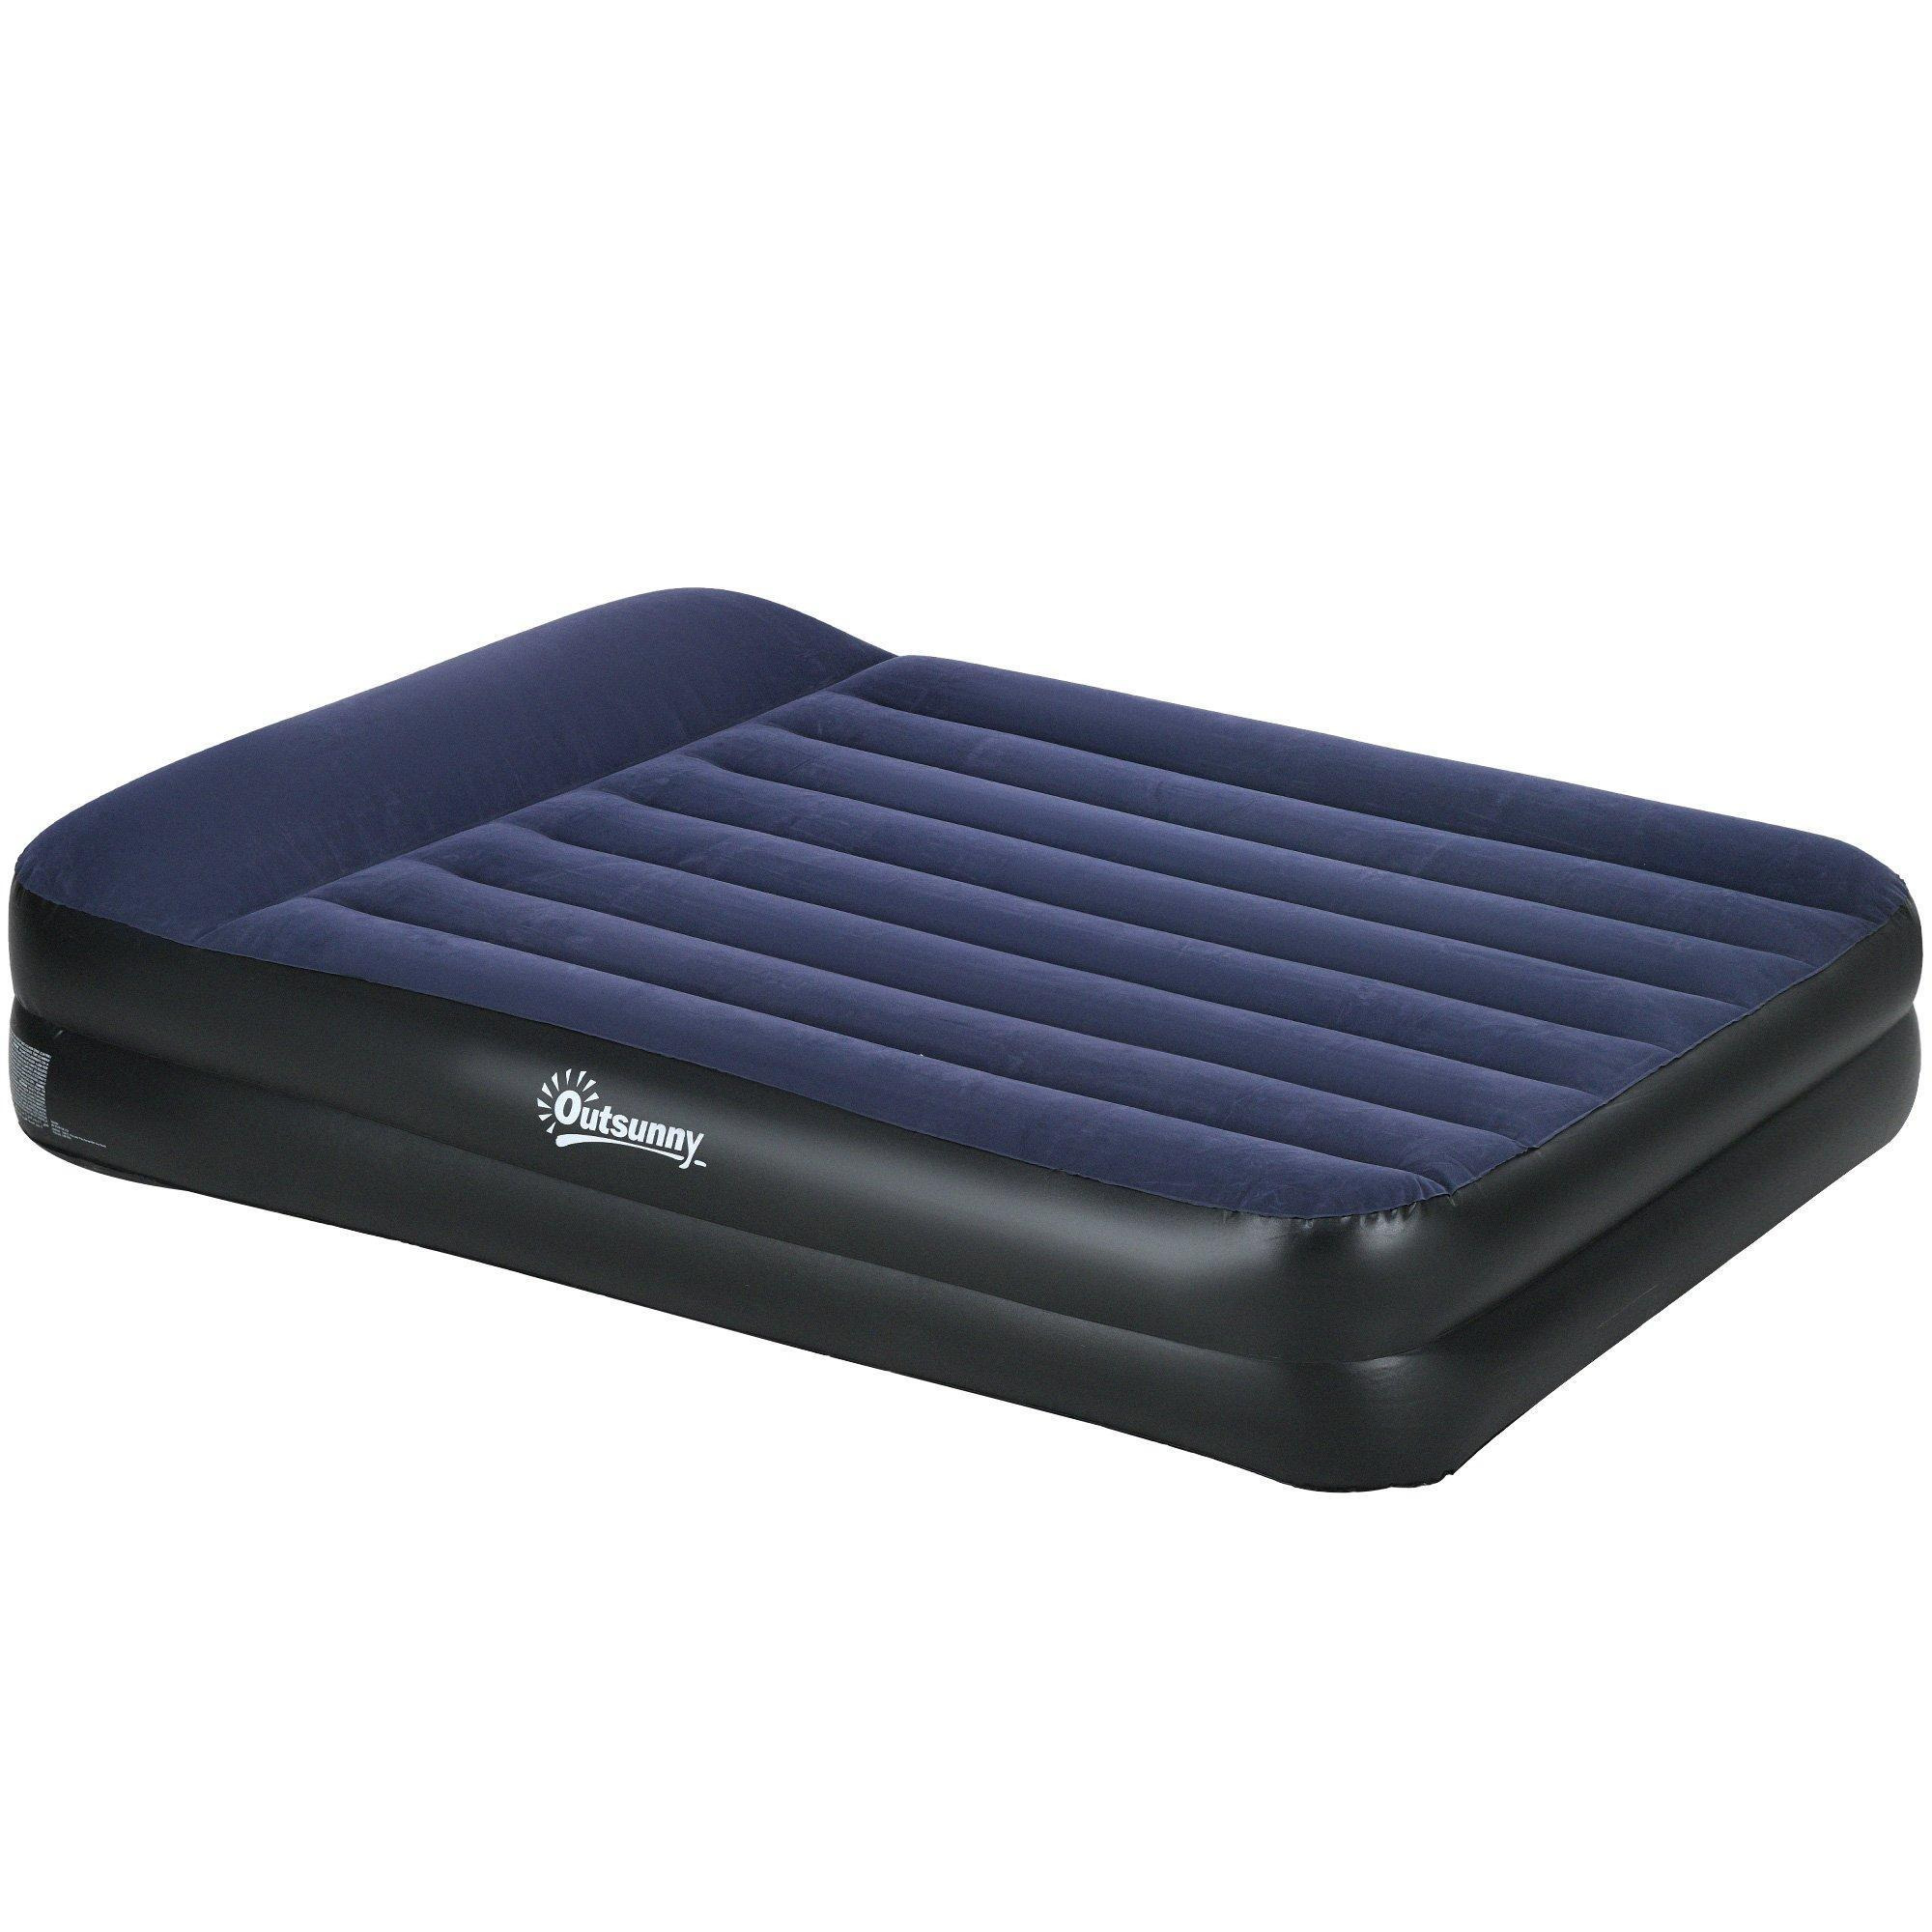 Queen Size Air Bed with Built-in Pump and Integrated Pillow, Inflatable Mattress - image 1